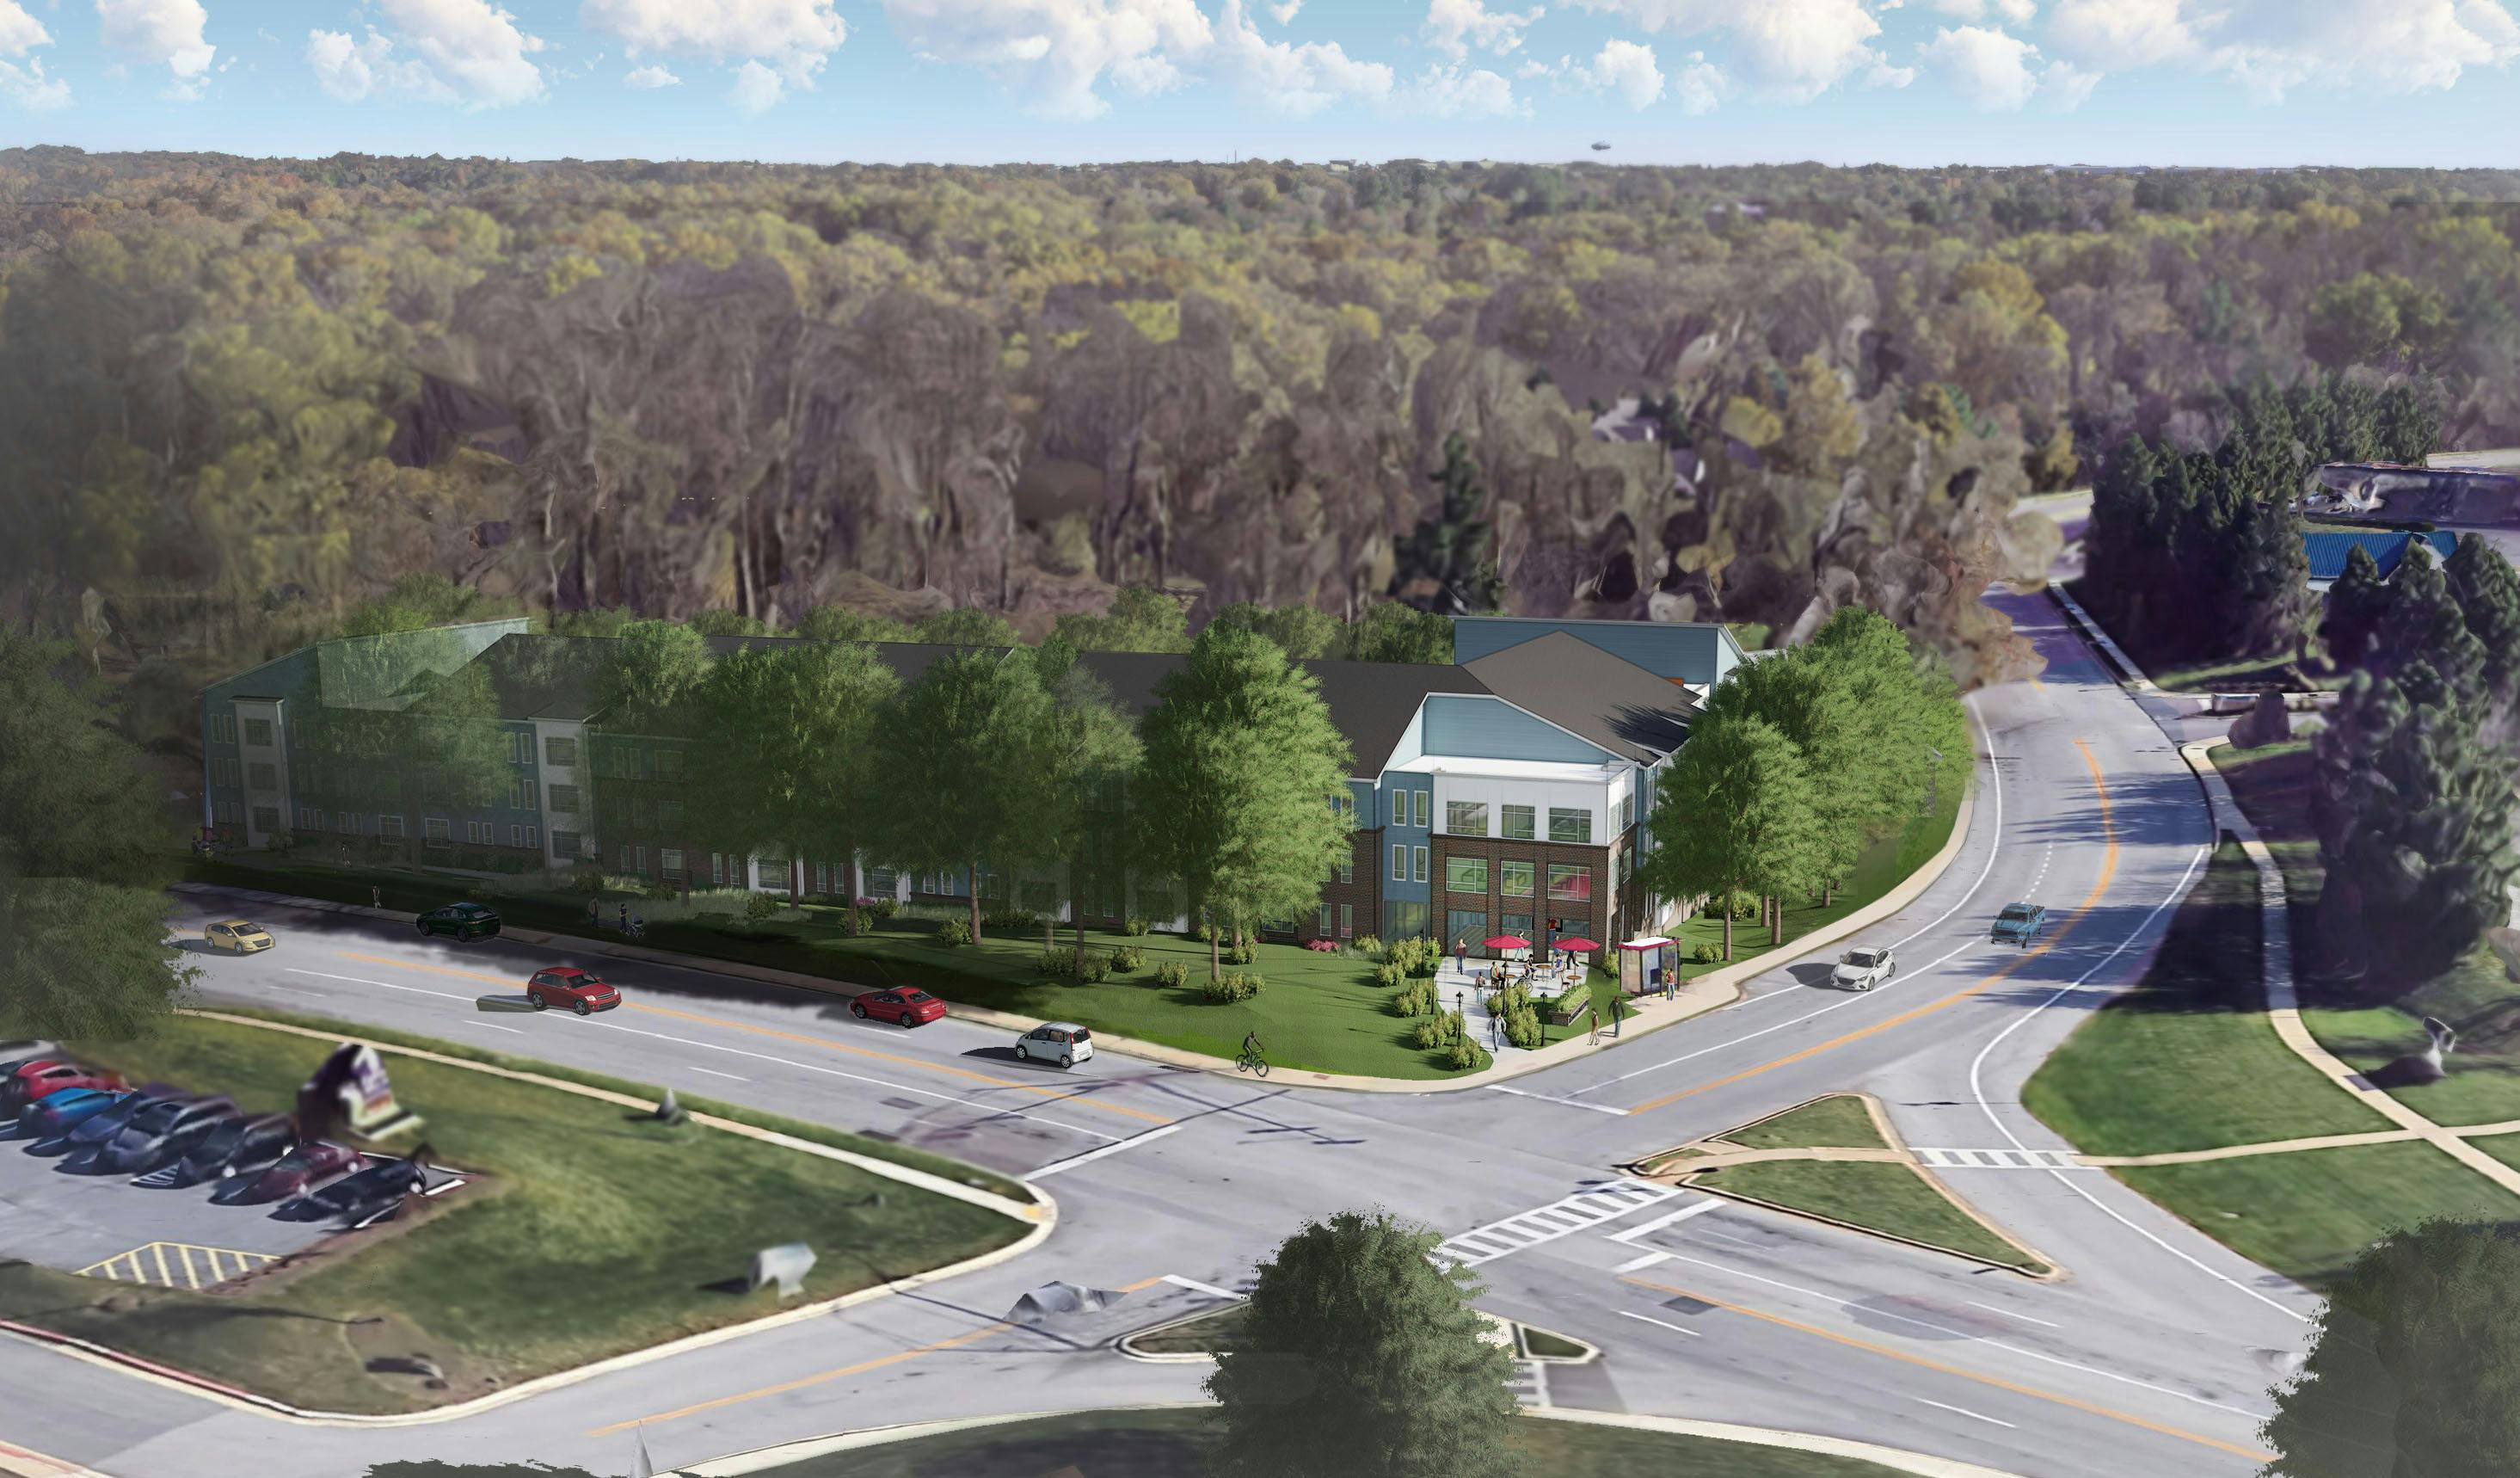 Patuxent Commons render of building and traffic intersection